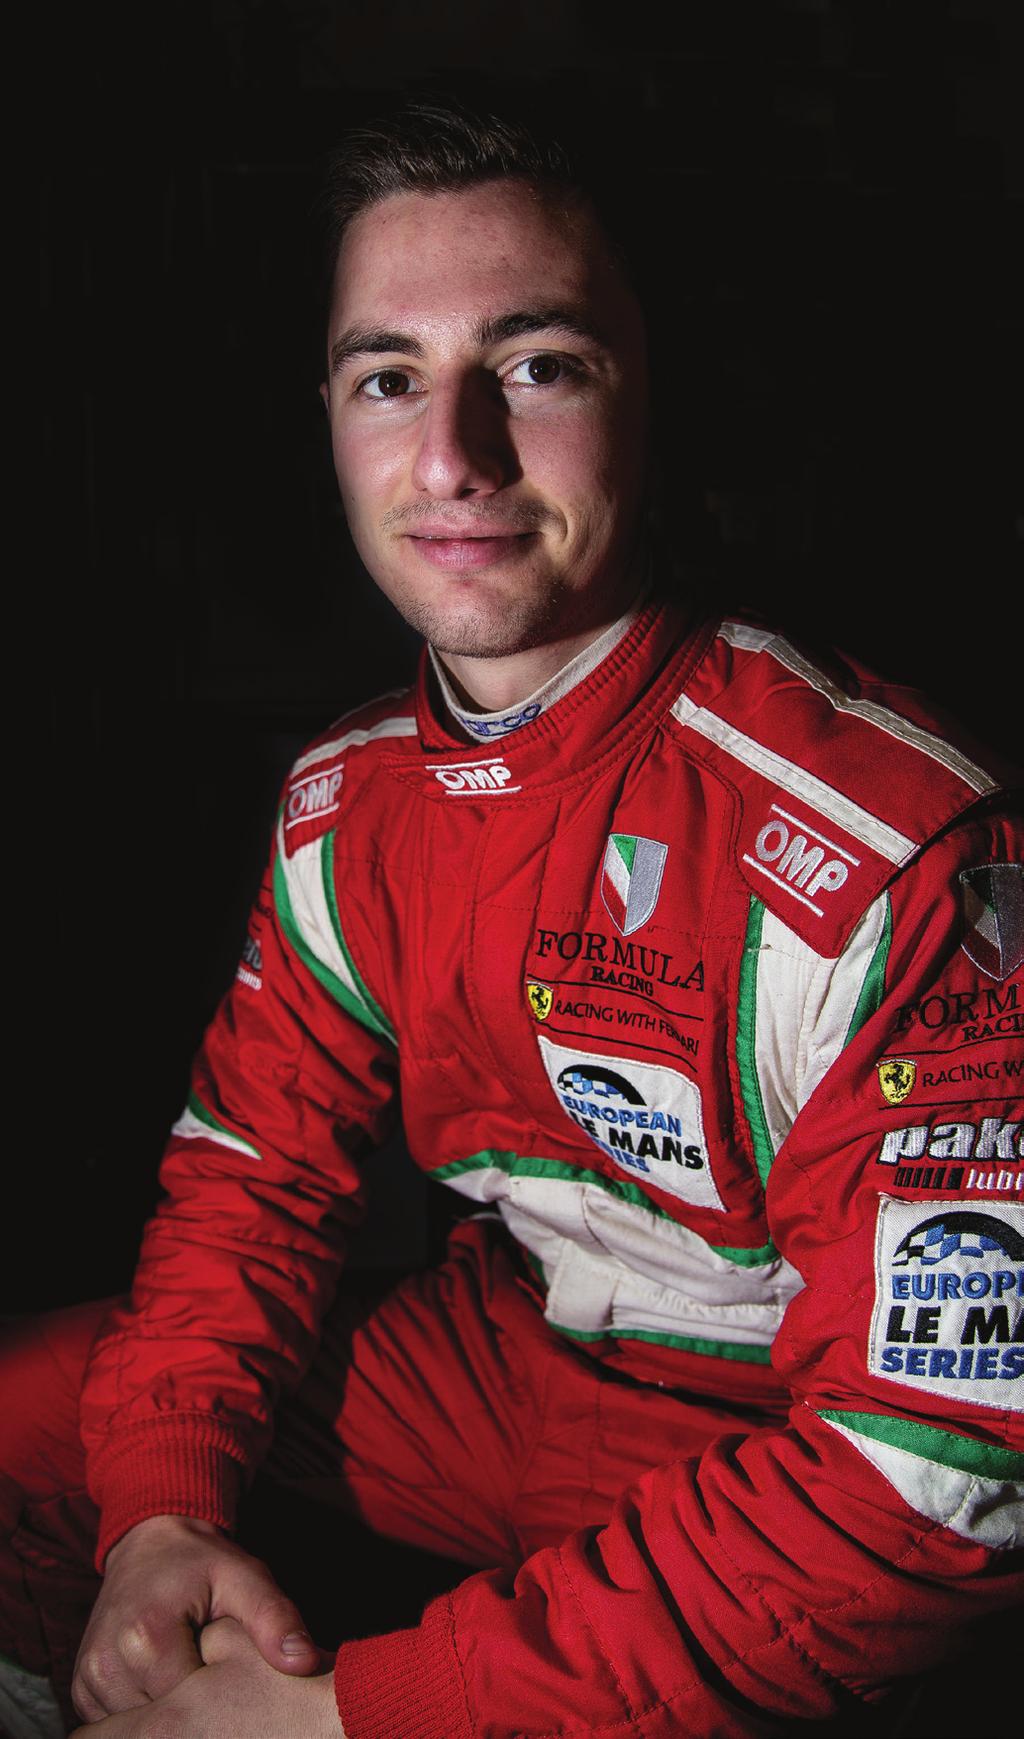 com/pages/mikkel Mac/208863015794922 Instagram mikkel_mac About Mikkel Mac Mikkel Mac is despite his young age one of the most experienced Danish racing drivers.